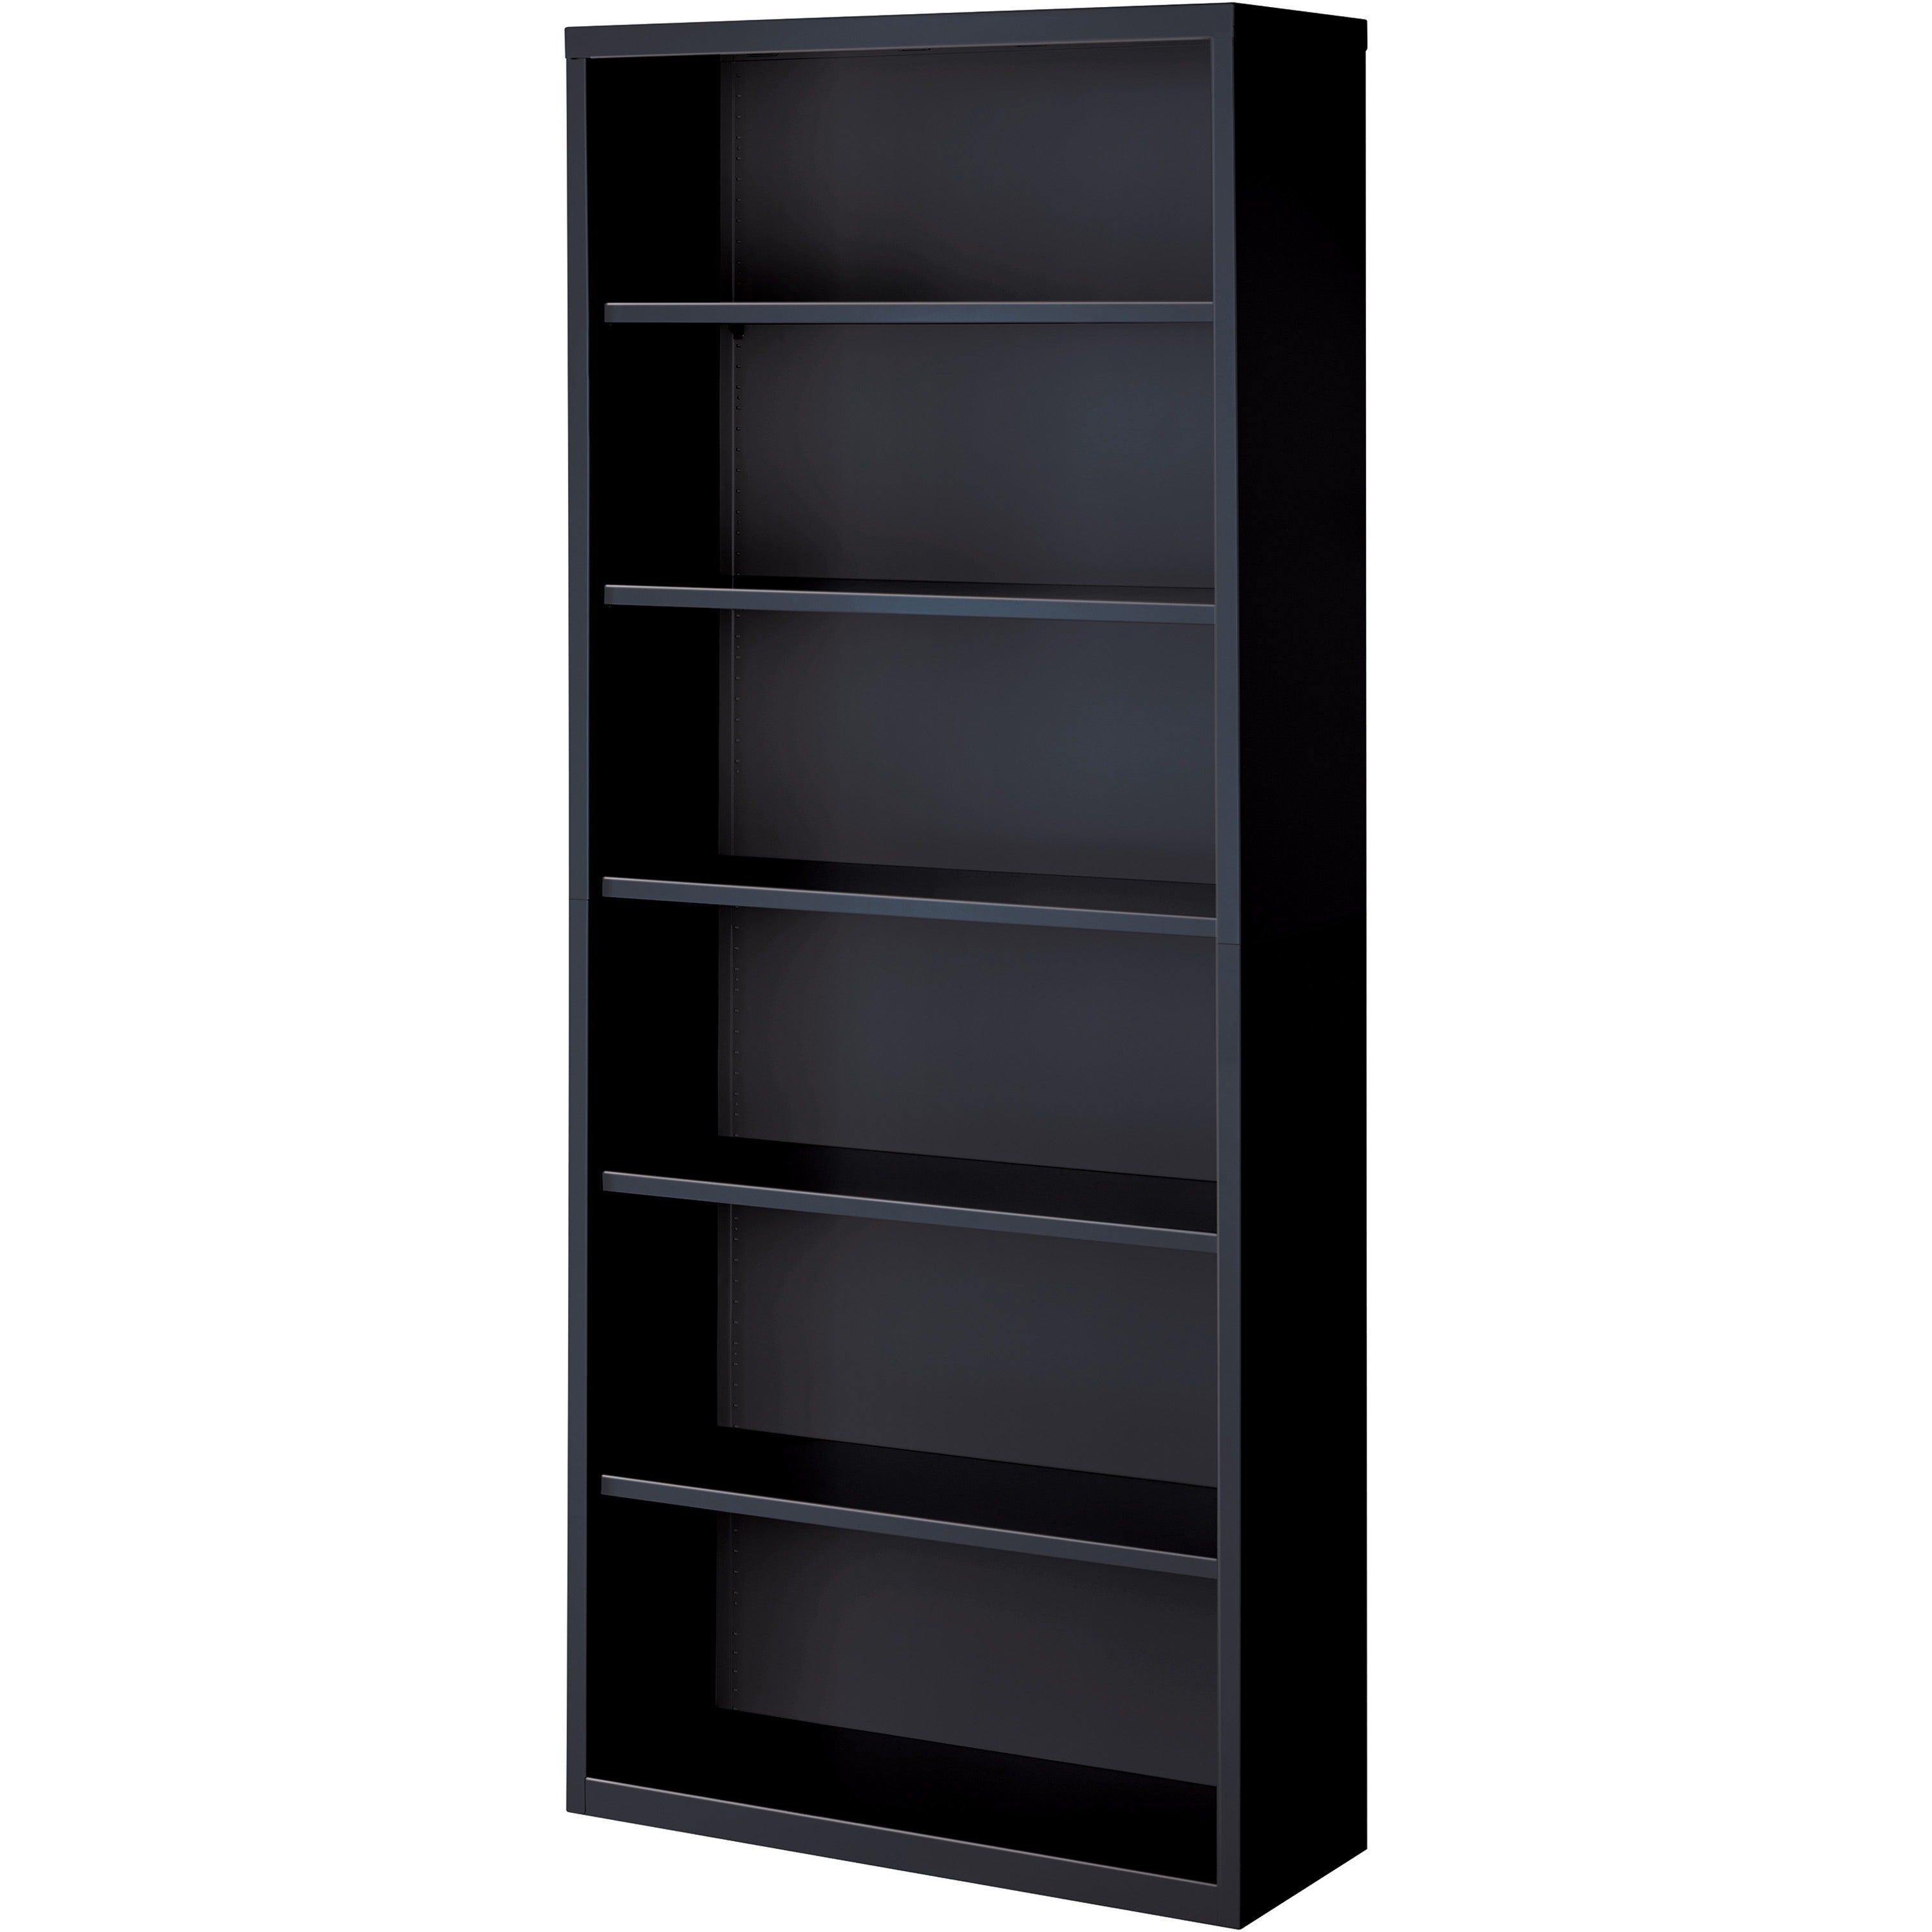 Lorell Fortress Series Bookcase - 34.5" x 13" x 82" - 6 x Shelf(ves) - Black - Powder Coated - Steel - Recycled - 